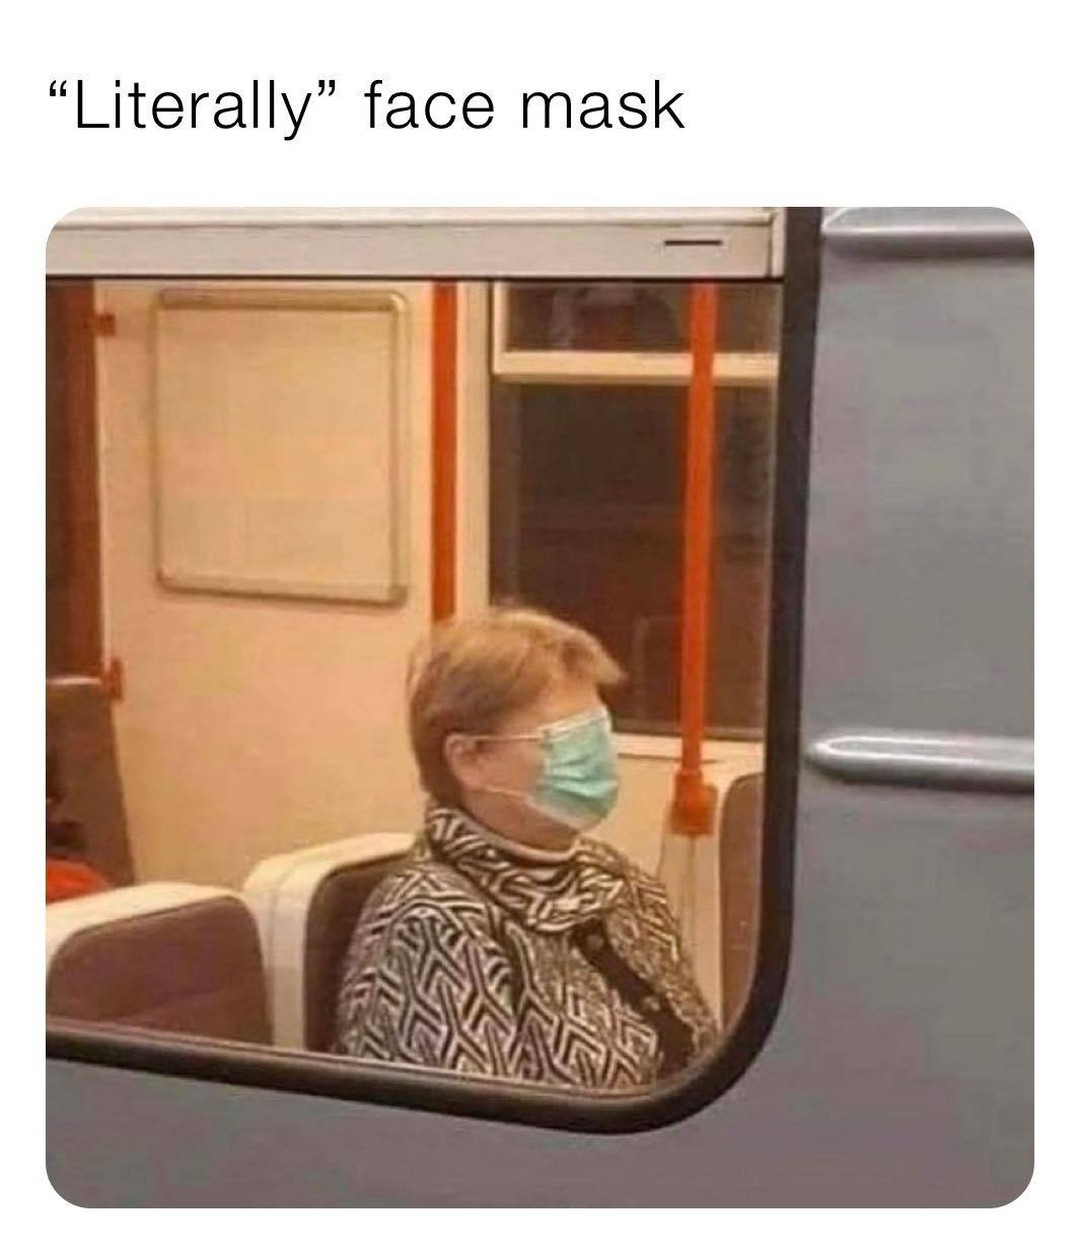 "Literally" face mask.